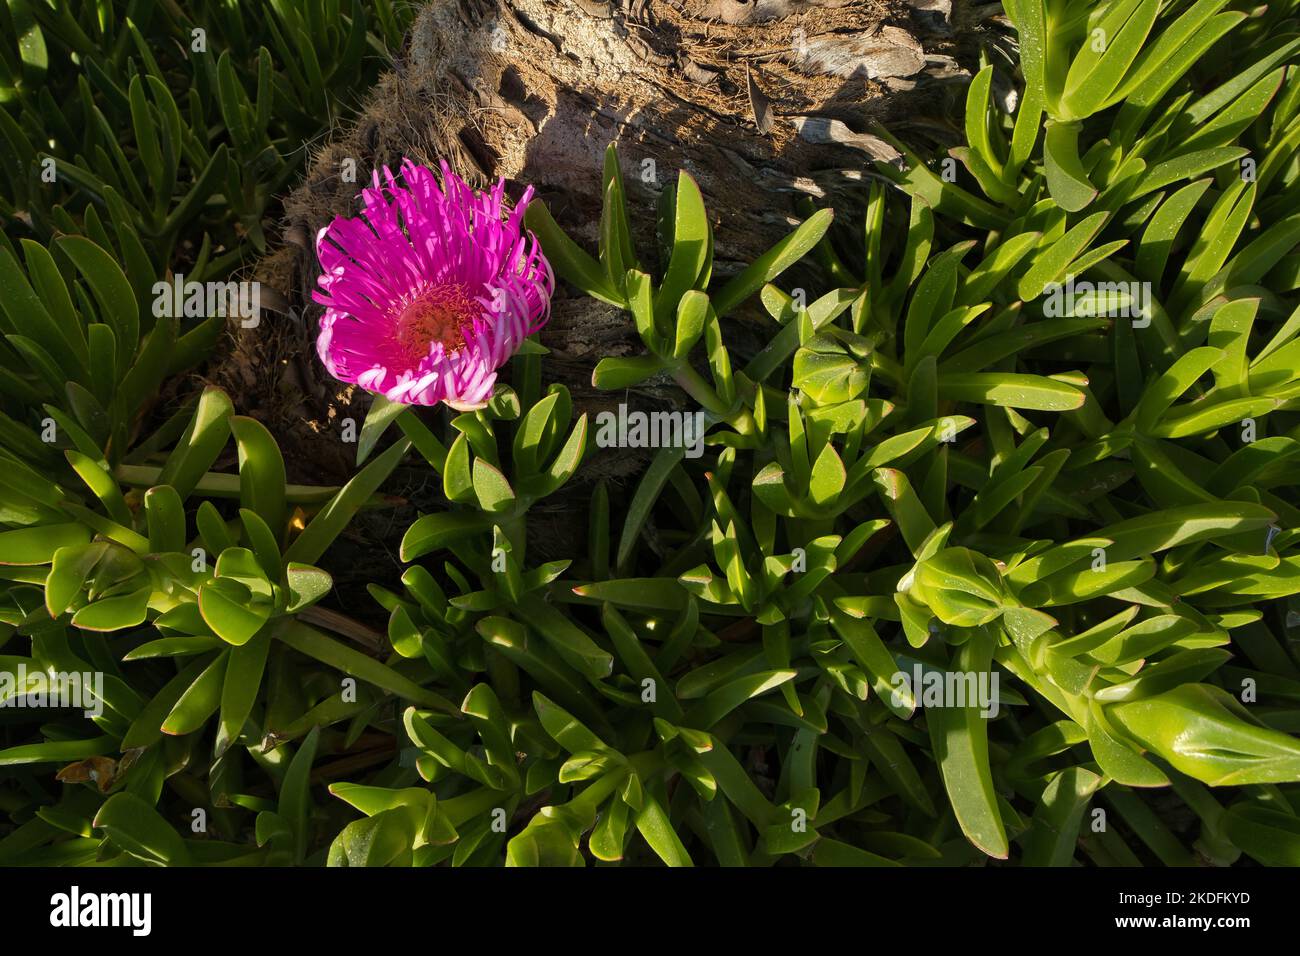 A tree trunk from a palm tree with a flower in the foreground Stock Photo